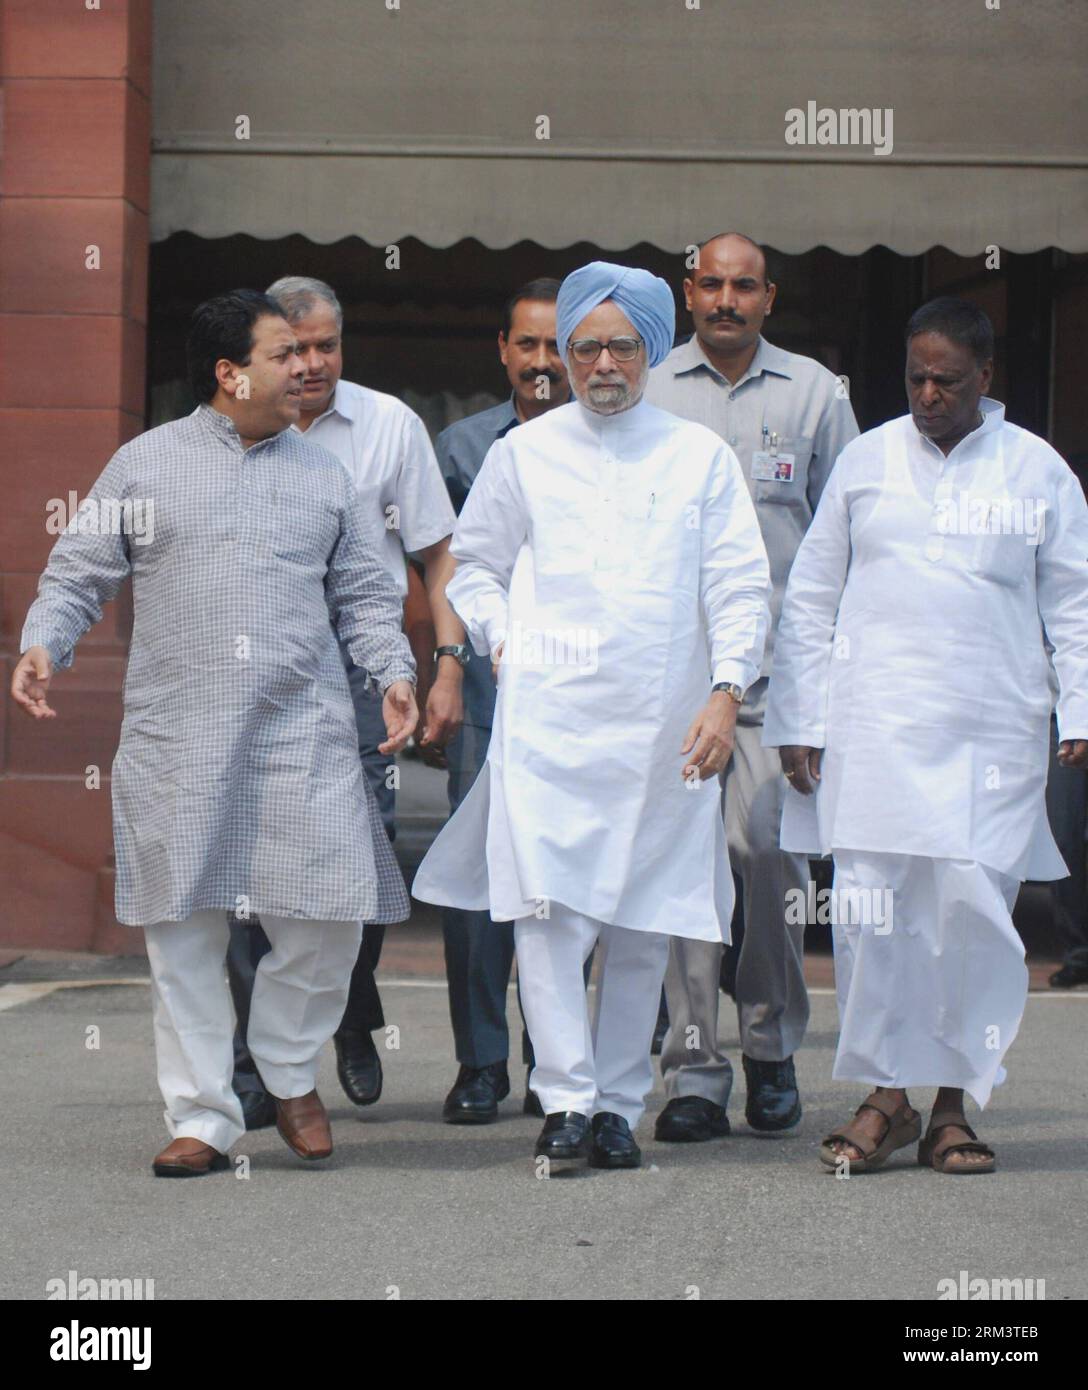 Bildnummer: 60321810  Datum: 05.08.2013  Copyright: imago/Xinhua (130805) -- NEW DELHI, Aug. 5, 2013 (Xinhua) -- Indian Prime Minister Manmohan Singh (C front) and cabinet members arrive for press conference on the first day of monsoon session in New Delhi, India, Aug. 5, 2013. Indian Parliament saw disruptions on the first of its monsoon session which opened Monday over the setting up of a new state, which has caused widespread controversy in the country. (Xinhua/Partha Sarkar) INDIA-NEW DELHI-PARLIAMENT-MONSOON SESSION PUBLICATIONxNOTxINxCHN People Politik xcb x0x 2013 quadrat premiumd Stock Photo